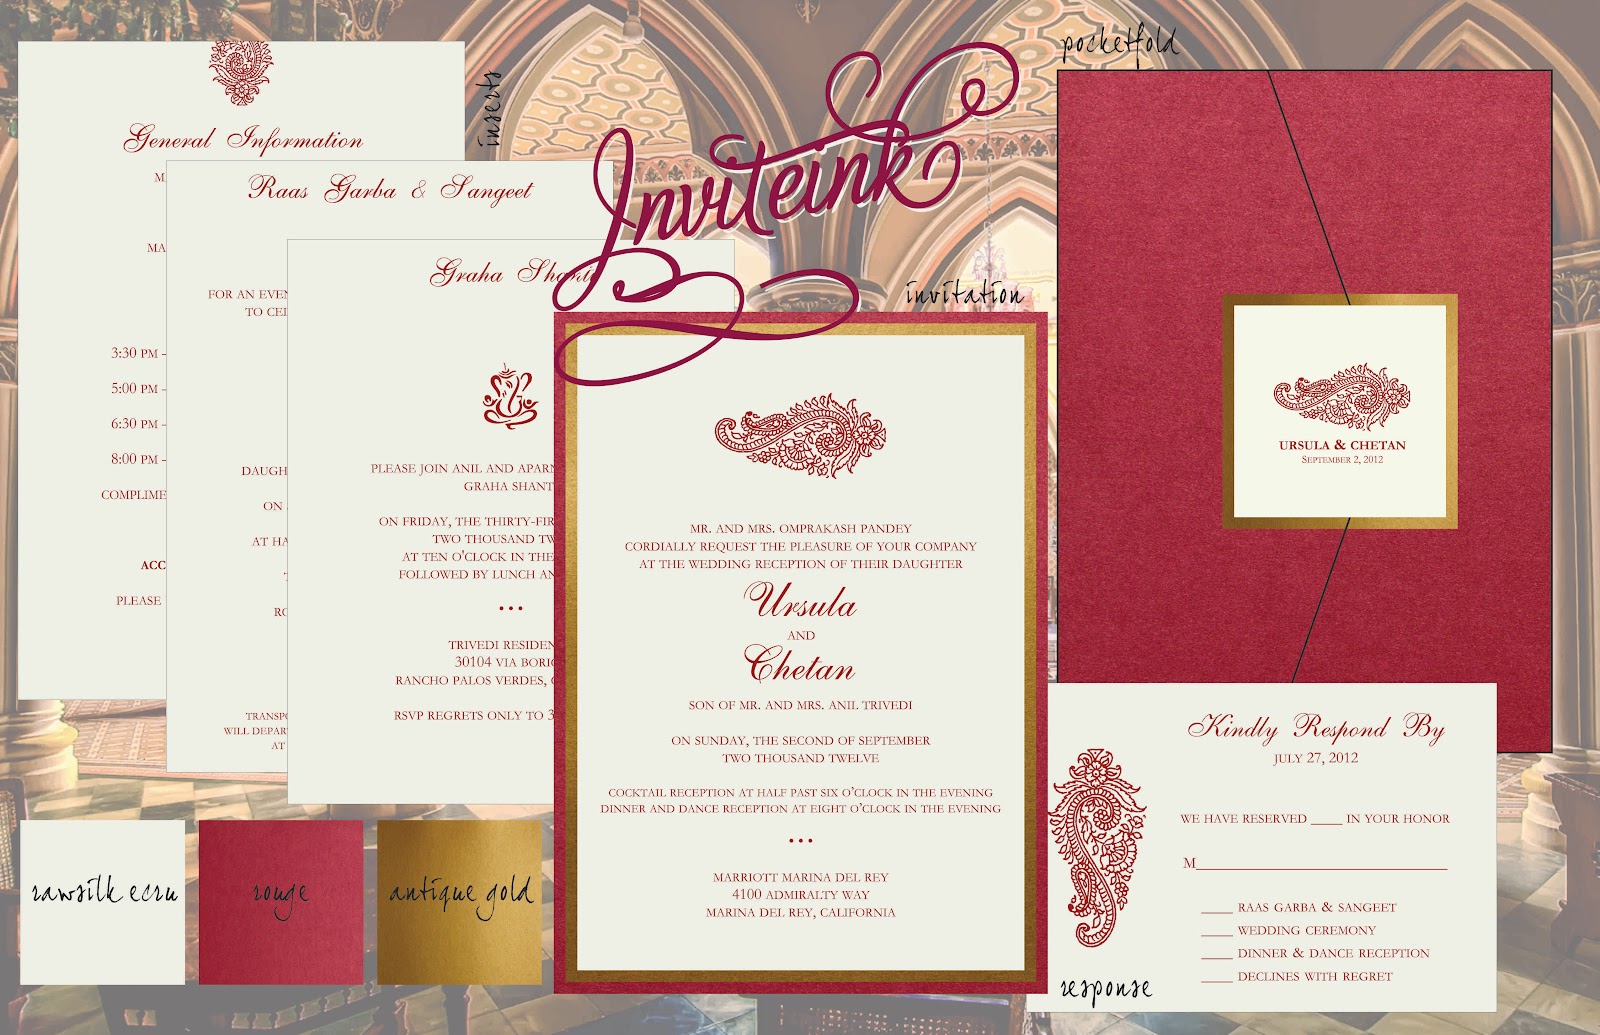 Inviteink: RED AND GOLD WEDDING INVITATION